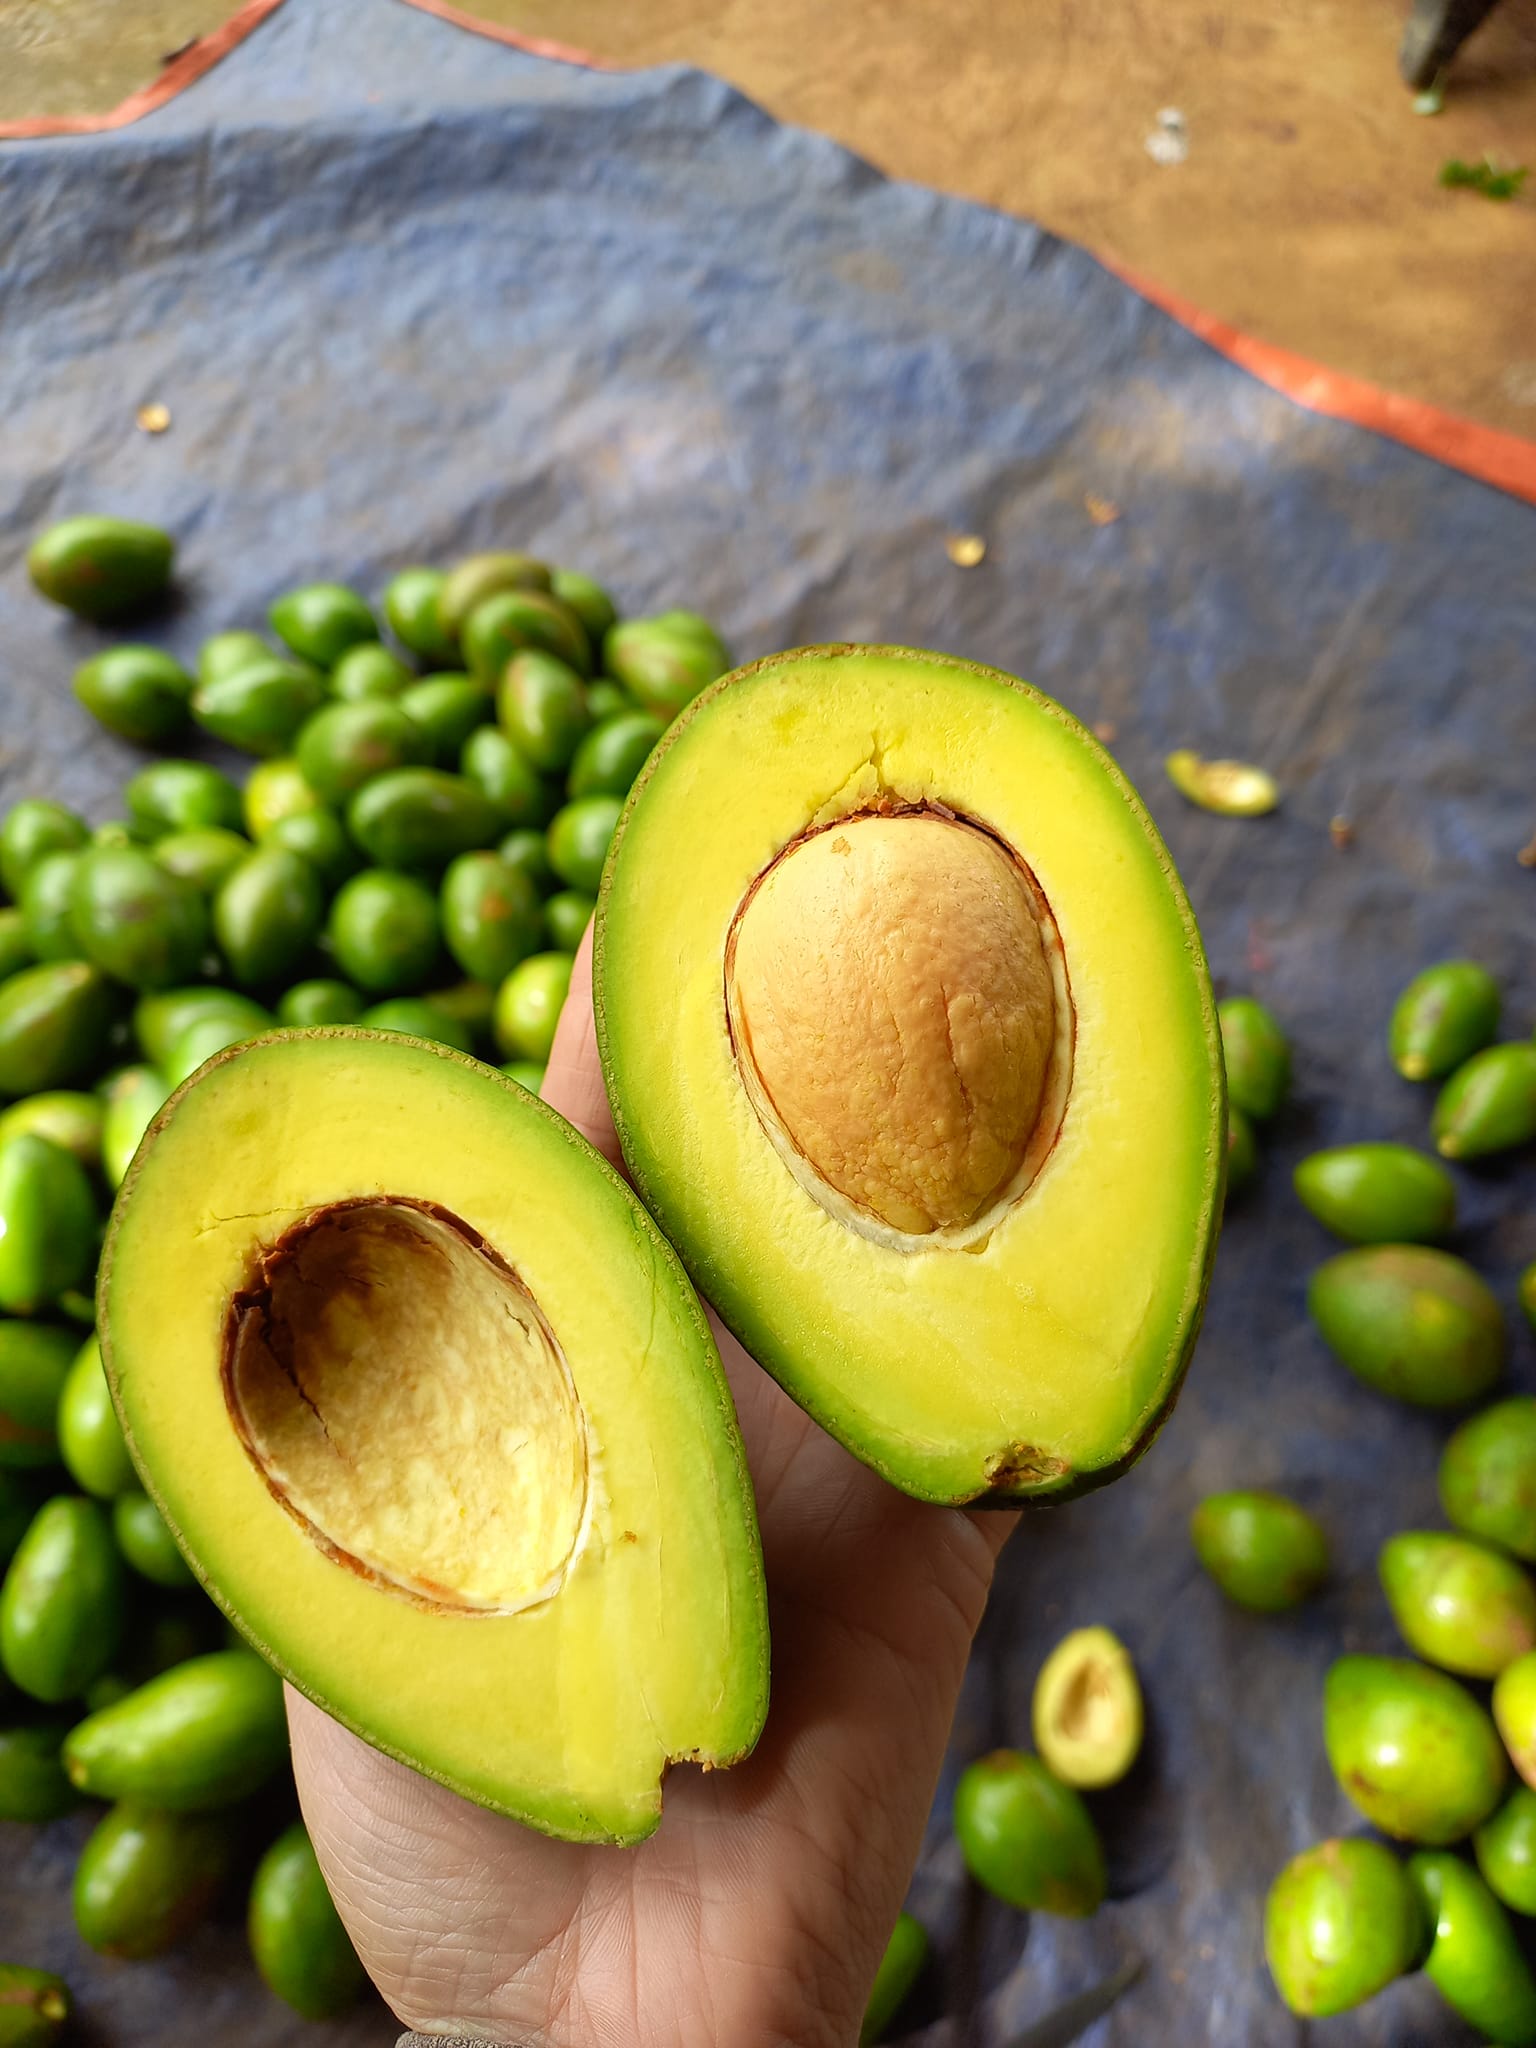 Booth avocado is often used to process frozen avocados for export